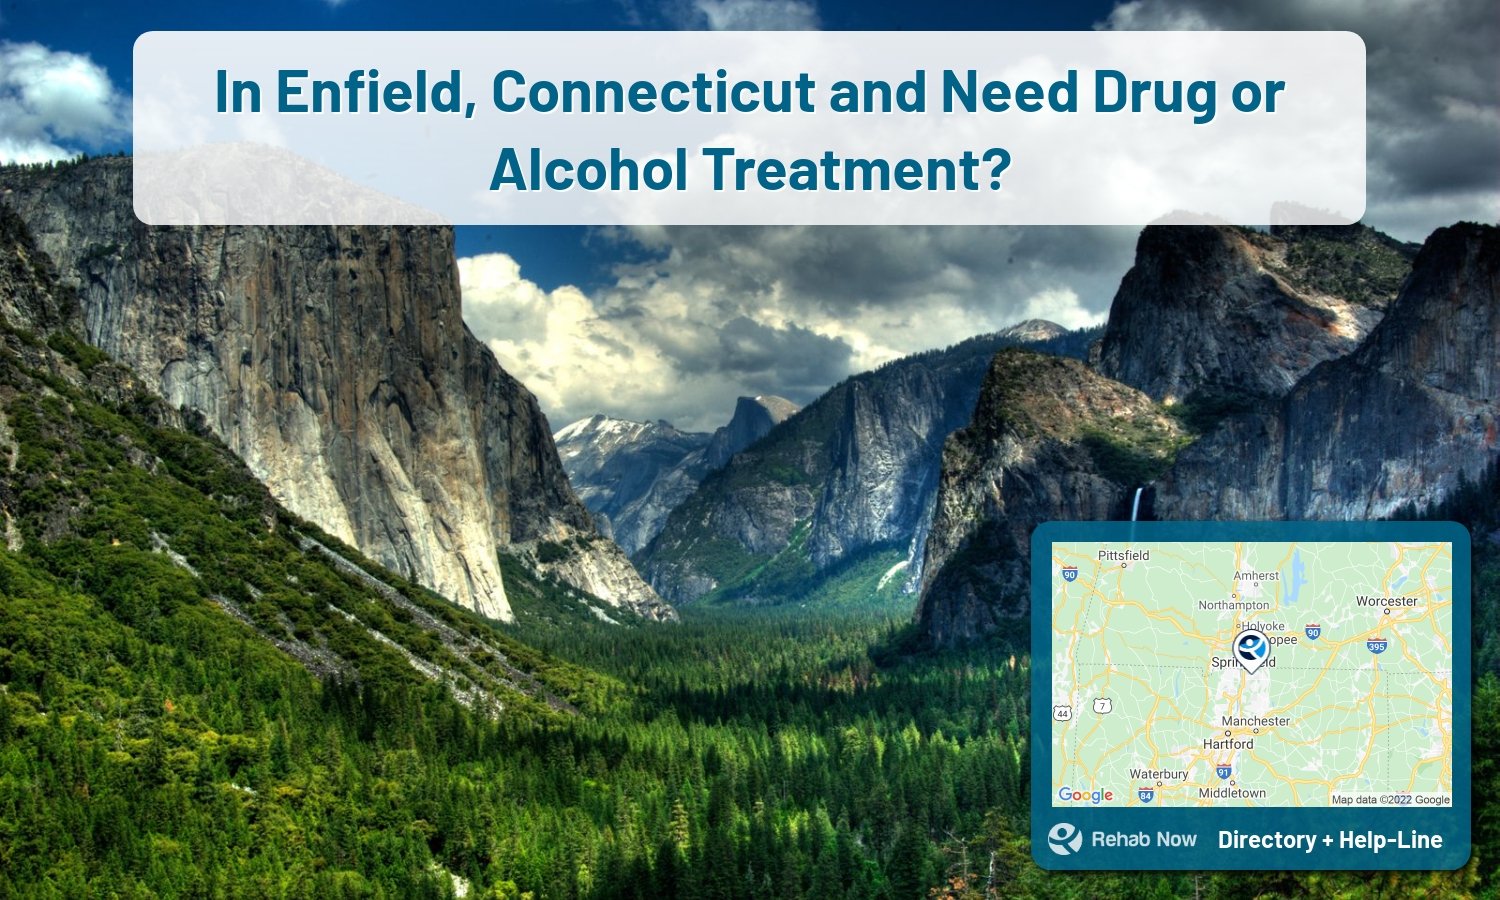 Let our expert counselors help find the best addiction treatment in Enfield, Connecticut now with a free call to our hotline.